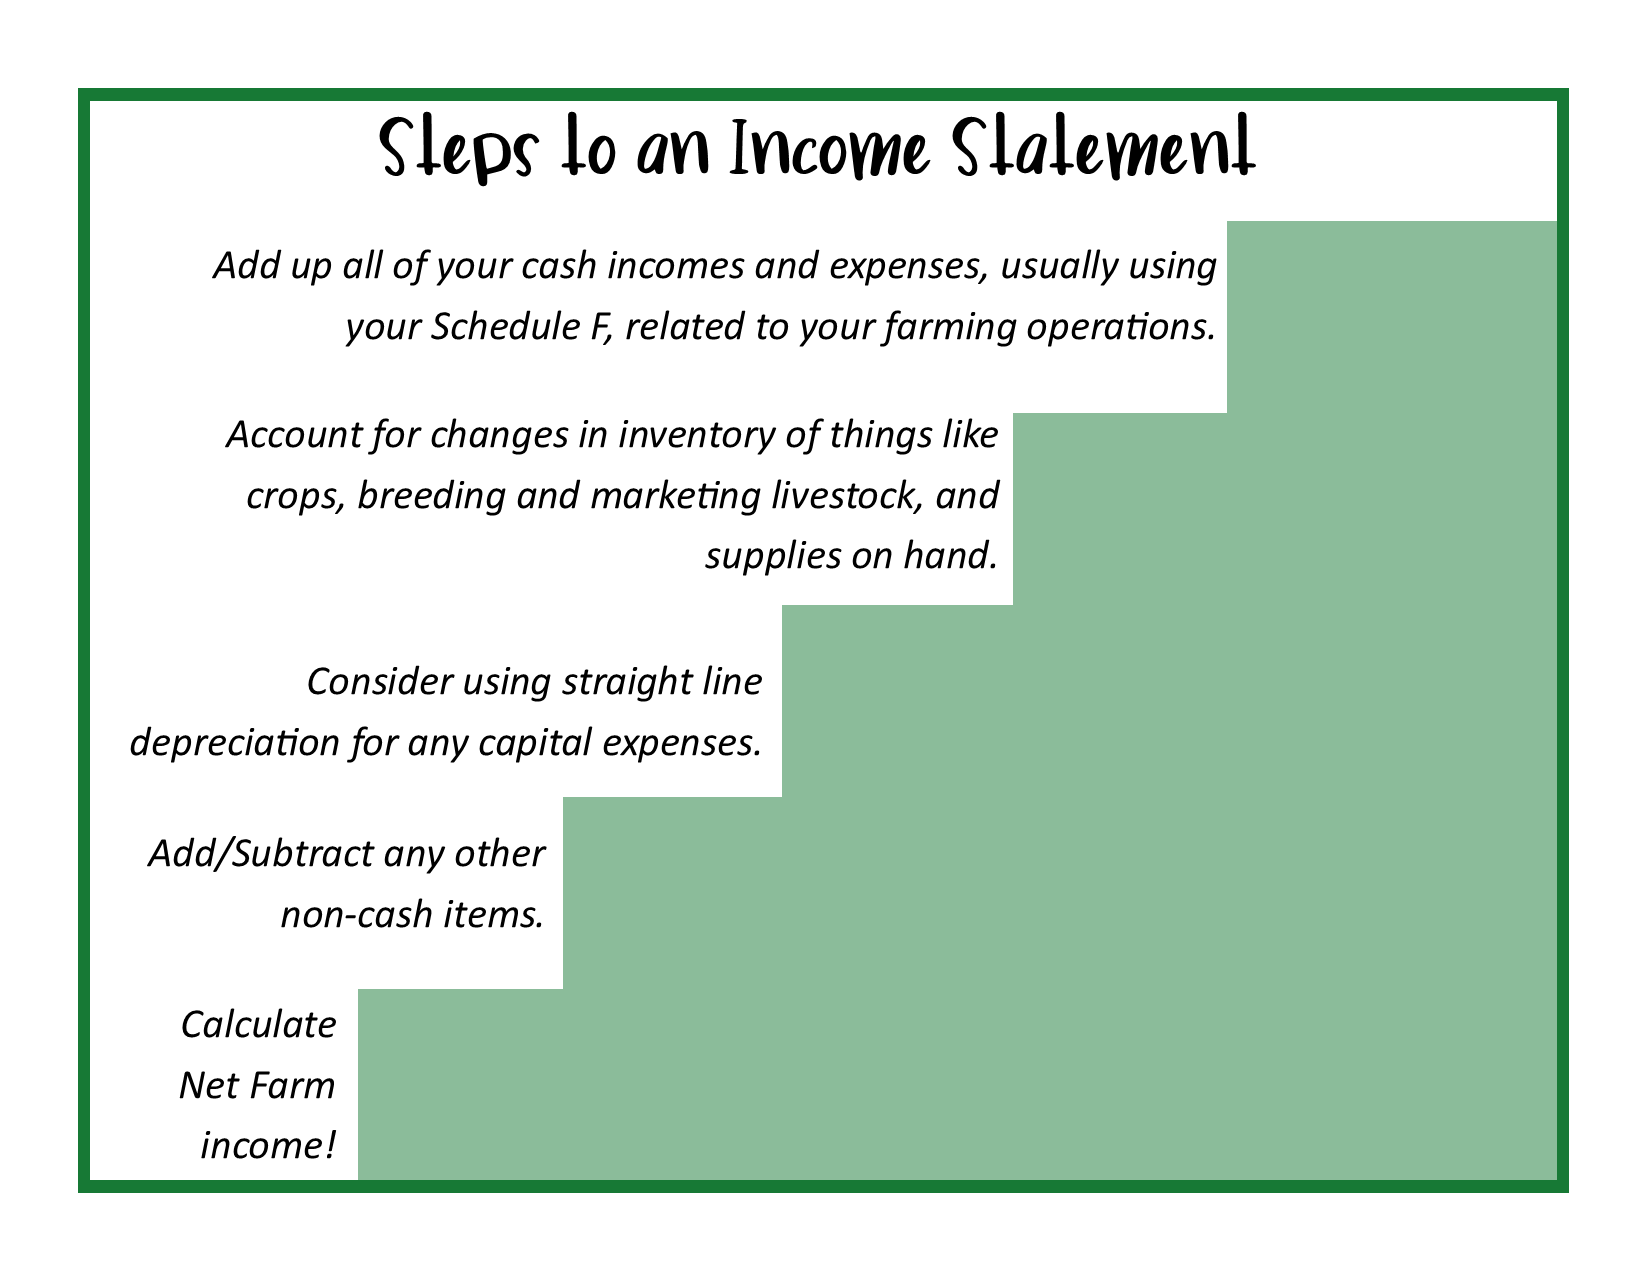 Steps to an income statement